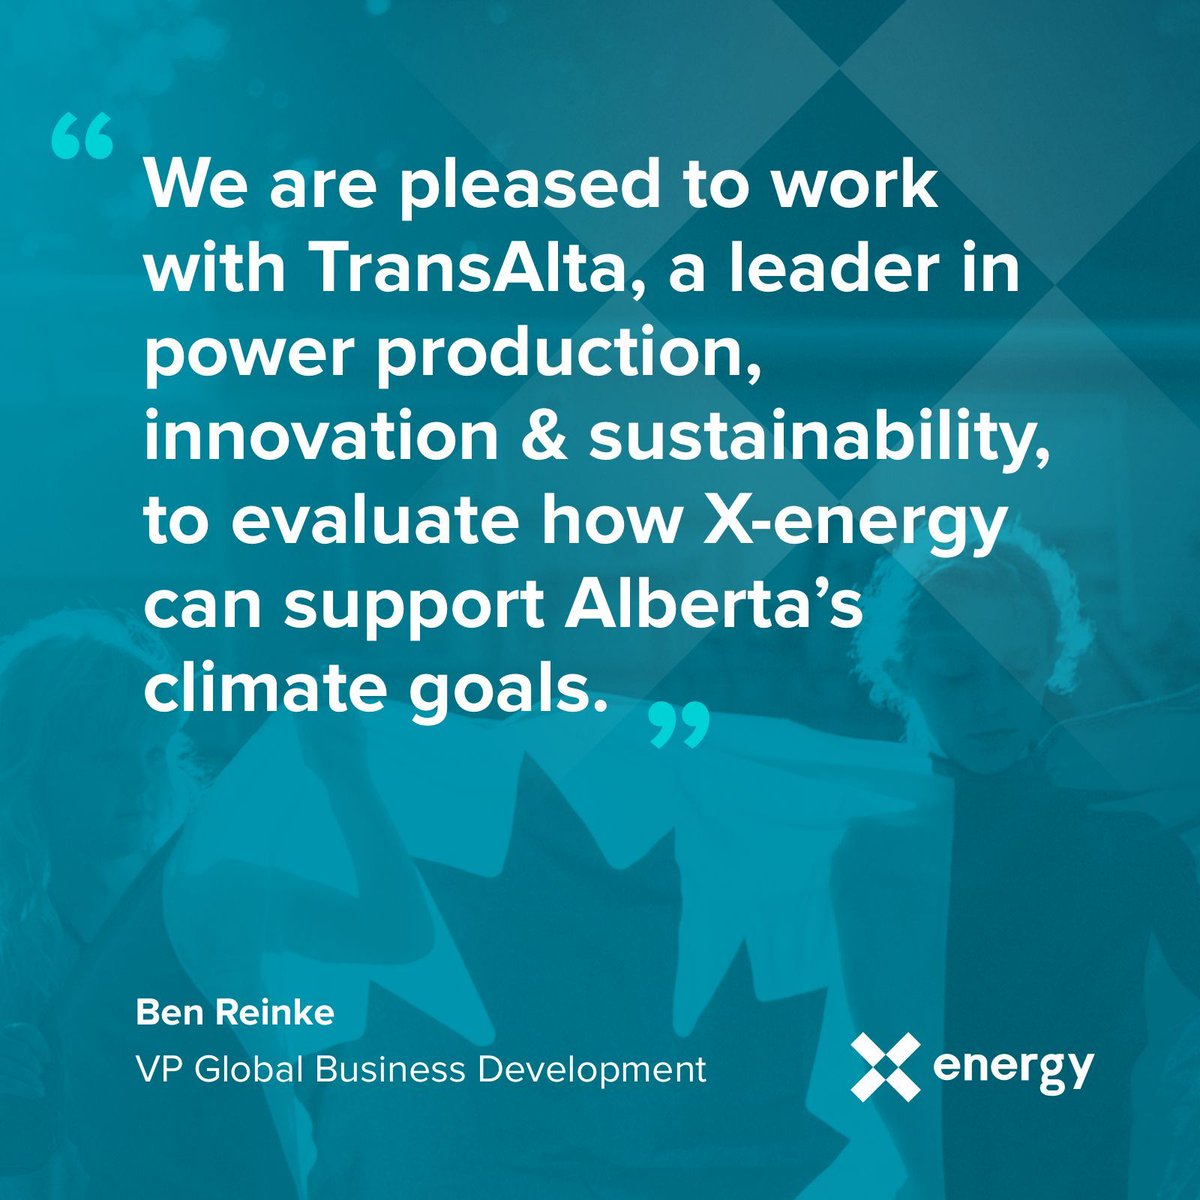 X-energy and TransAlta have partnered to study repurposing a fossil fuel electricity generation site for an Xe-100 plant, thanks to Emissions Reduction Alberta. X-energy aims to deploy Alberta's first advanced SMR by the early 2030s. Read more: buff.ly/43R0z4I